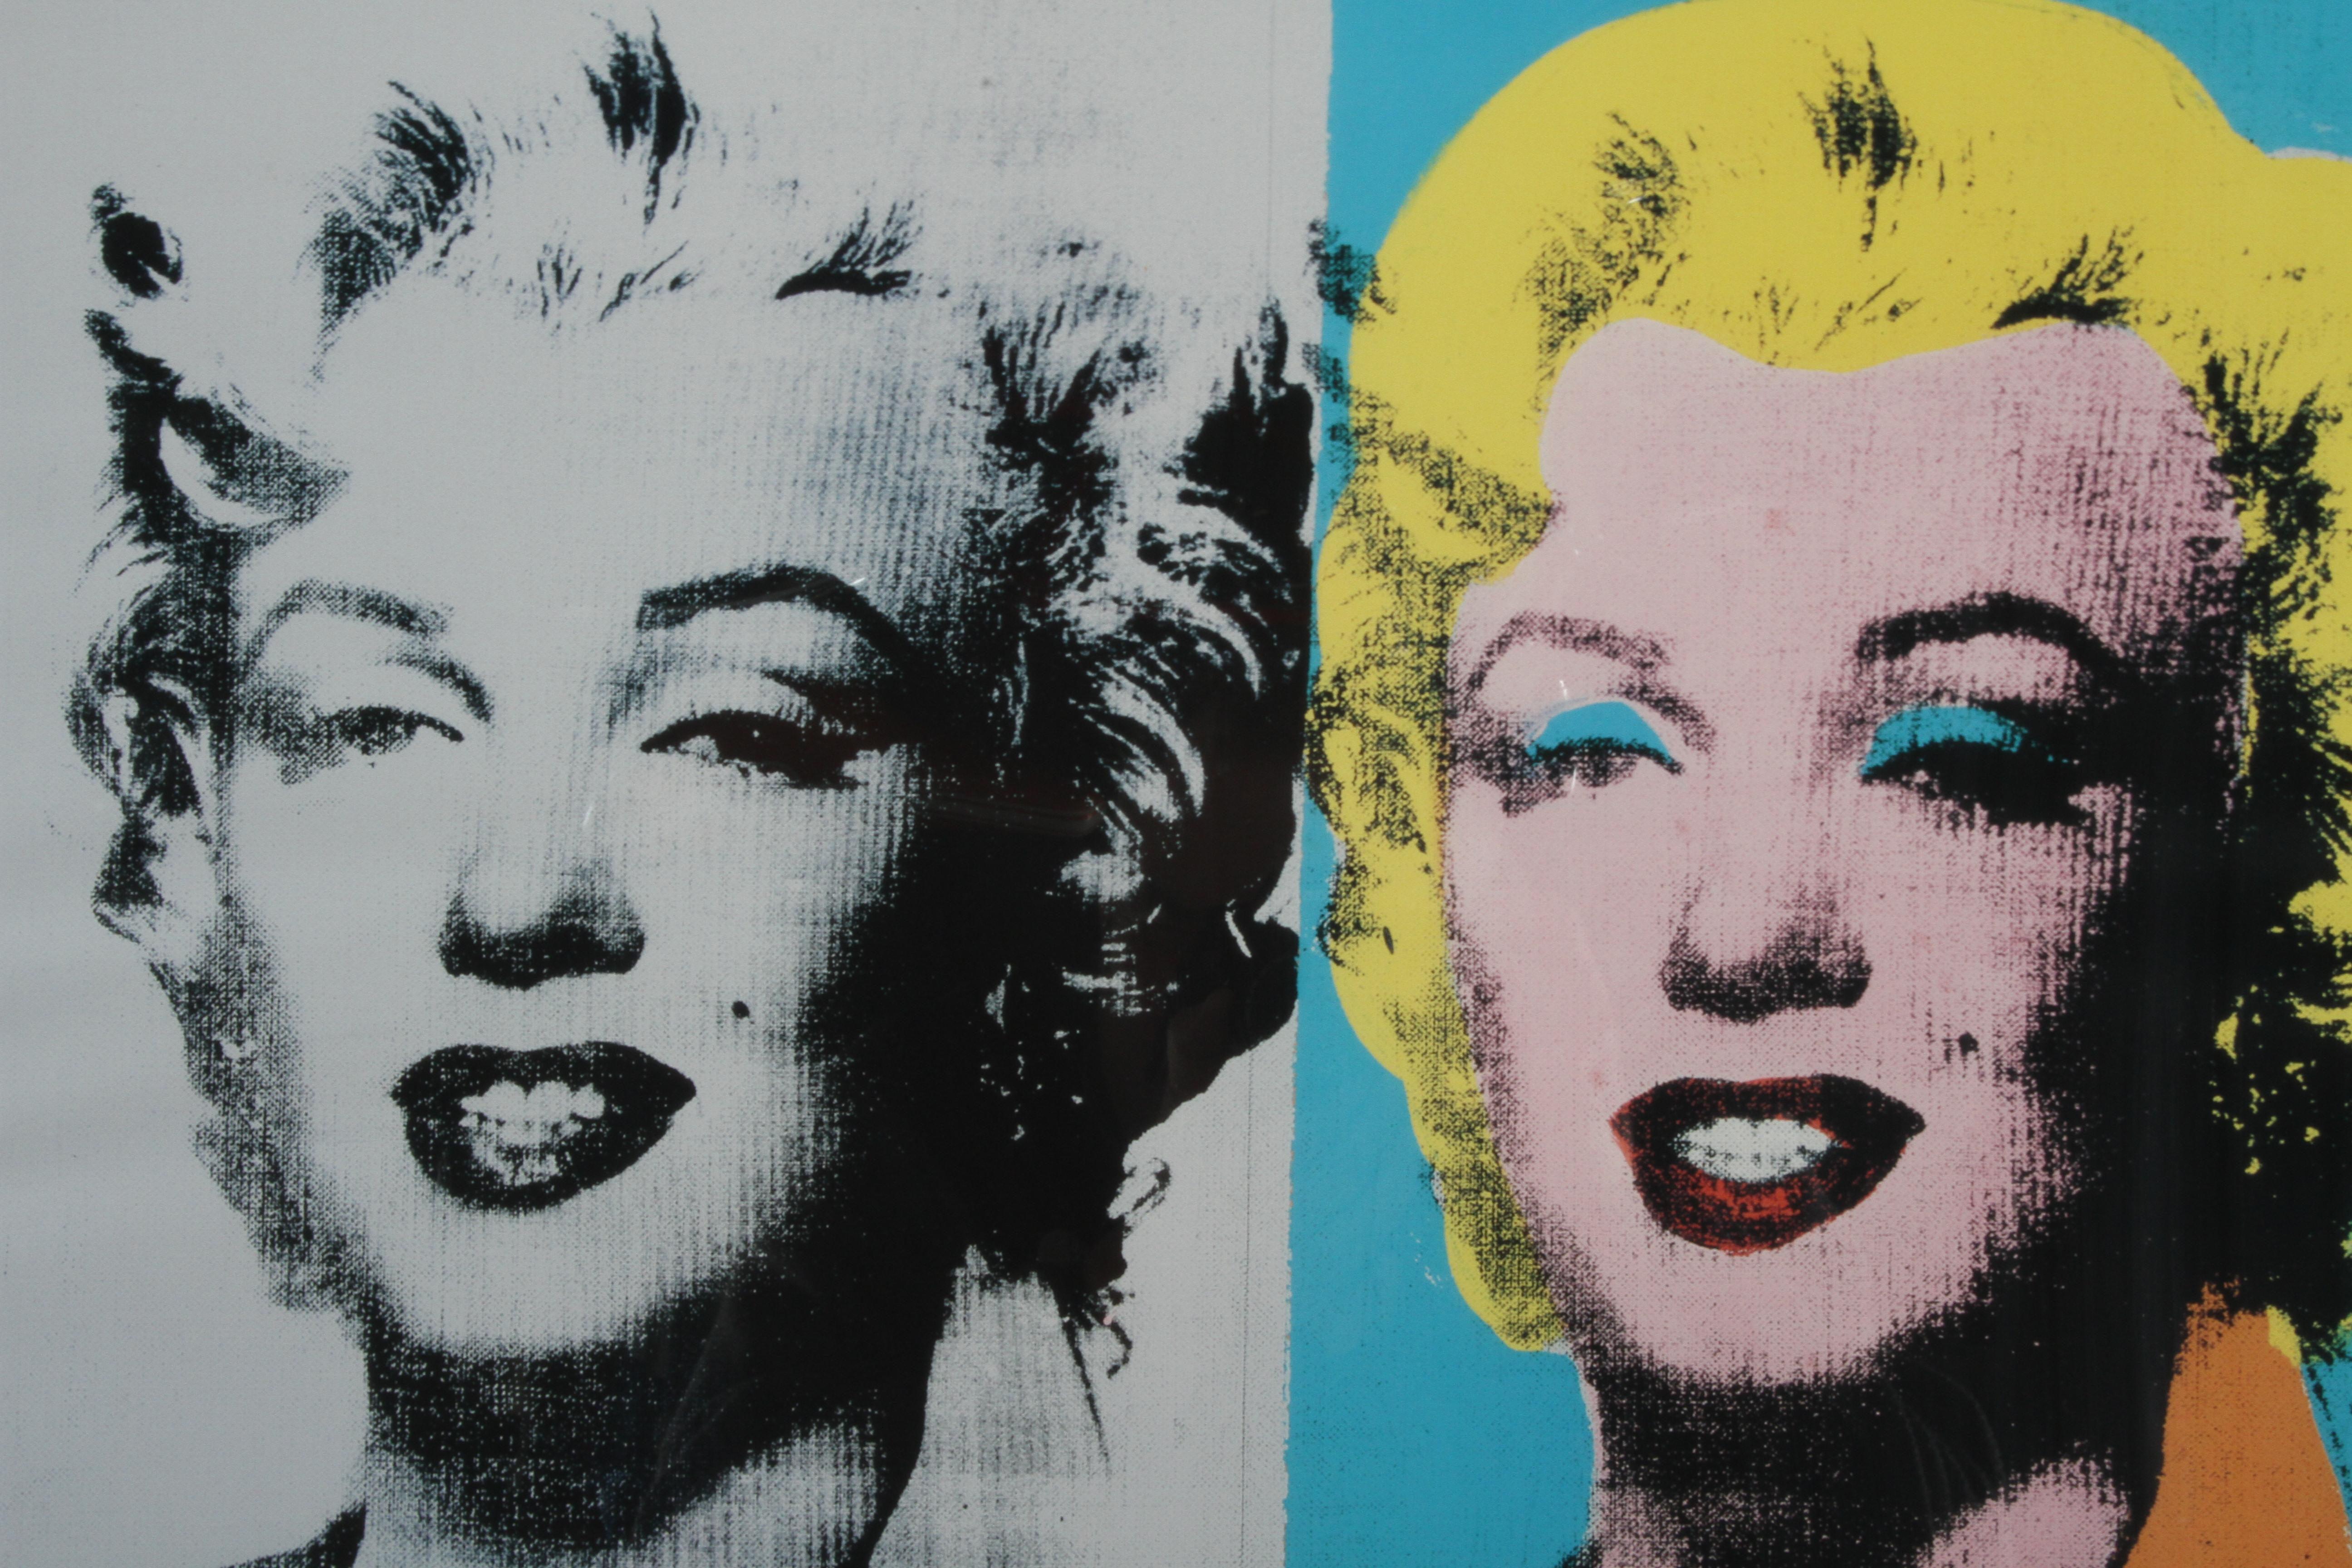 Rare poster of Andy Warhol's Double Marilyn Monroe 1962 for The Greenberg Gallery, circa 1980s. Noted gallery owner Ronald Greenberg, establish his gallery in the early 1970s, after taking over the former Joseph A. Helman Gallery in St. Louis.